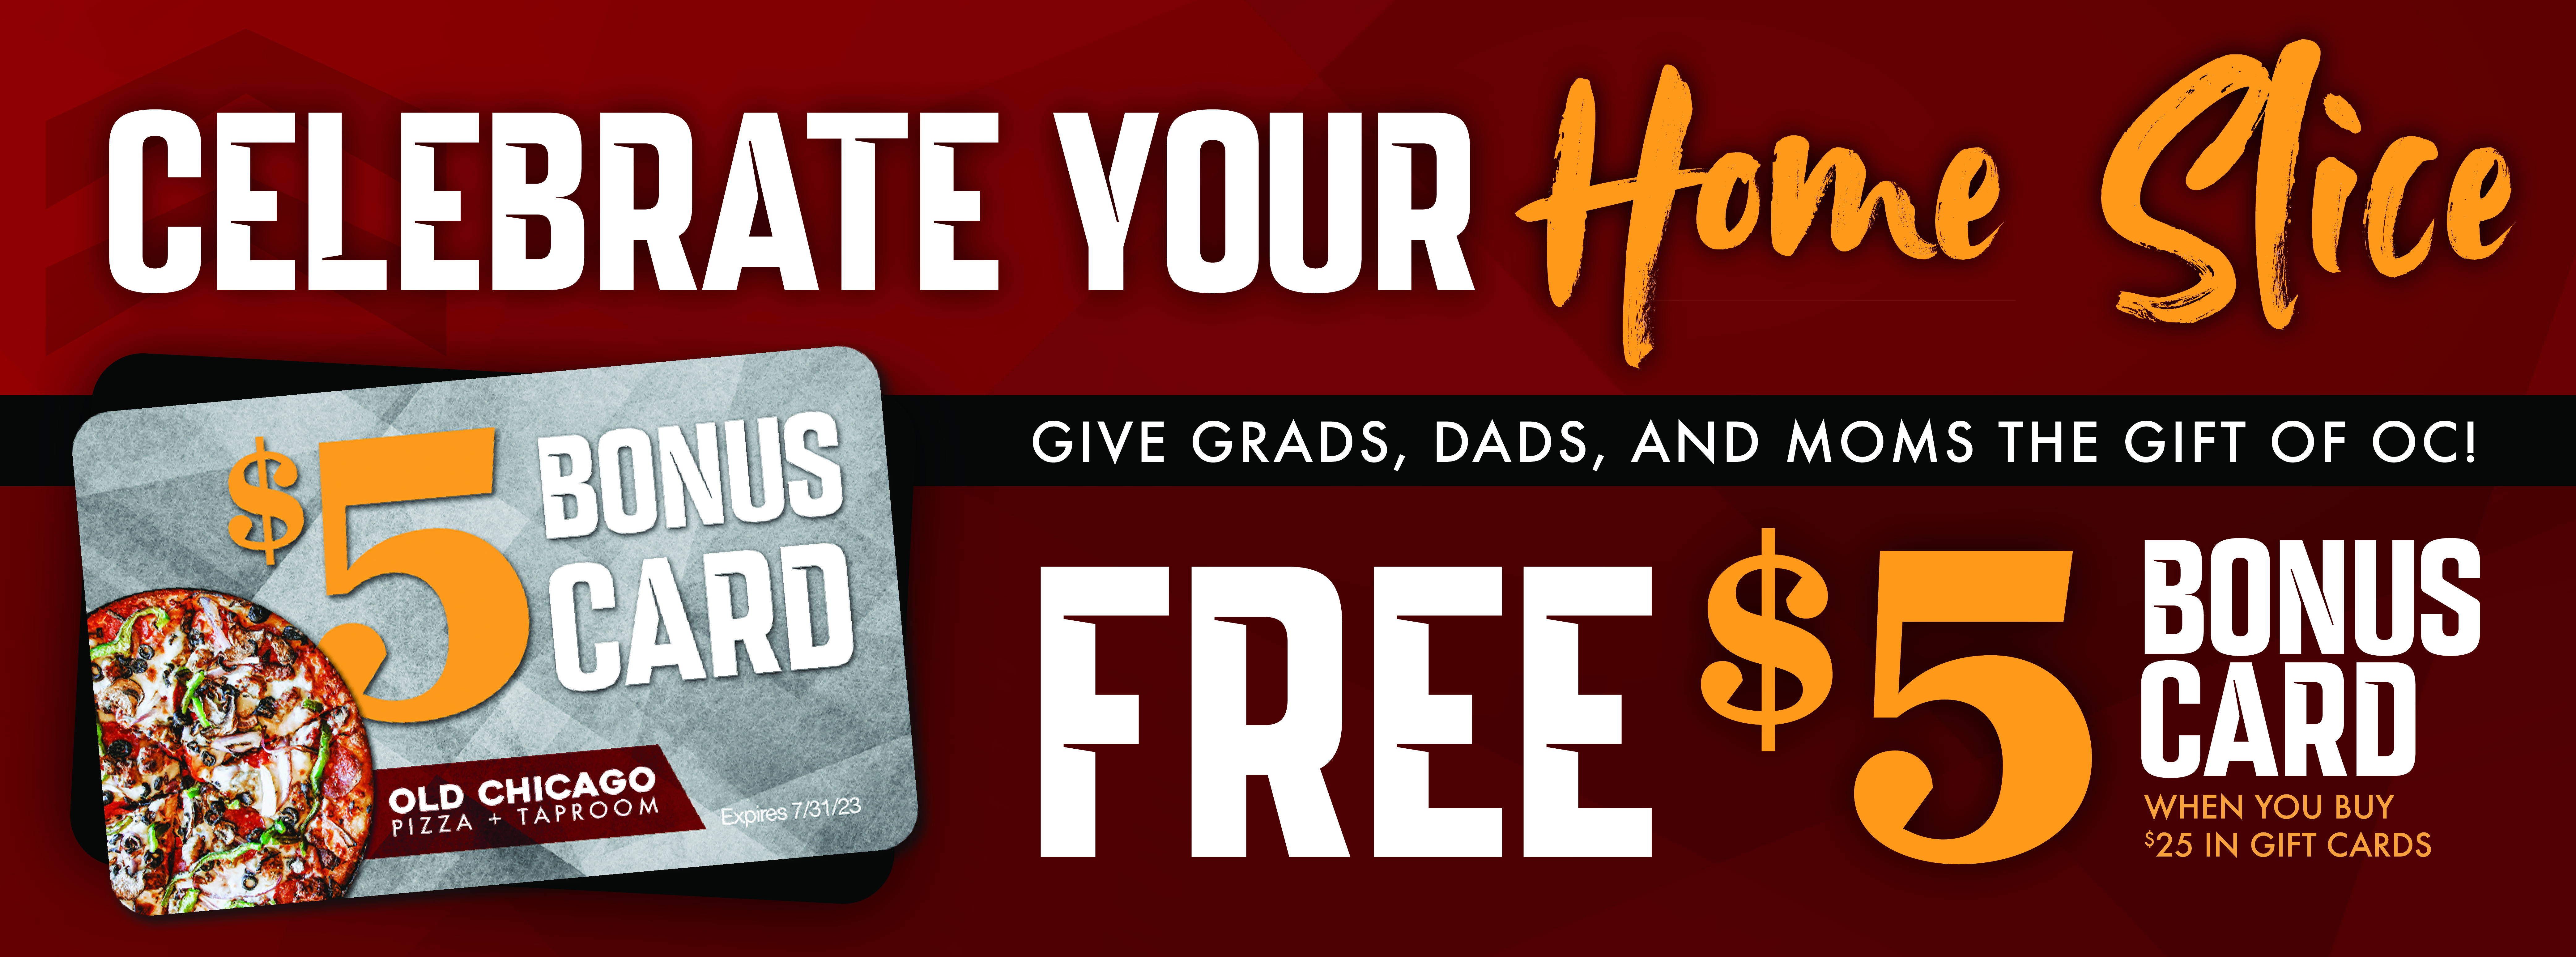 Celebrate your home slice. Free $5 bonus card when you buy $25 in gift cards.